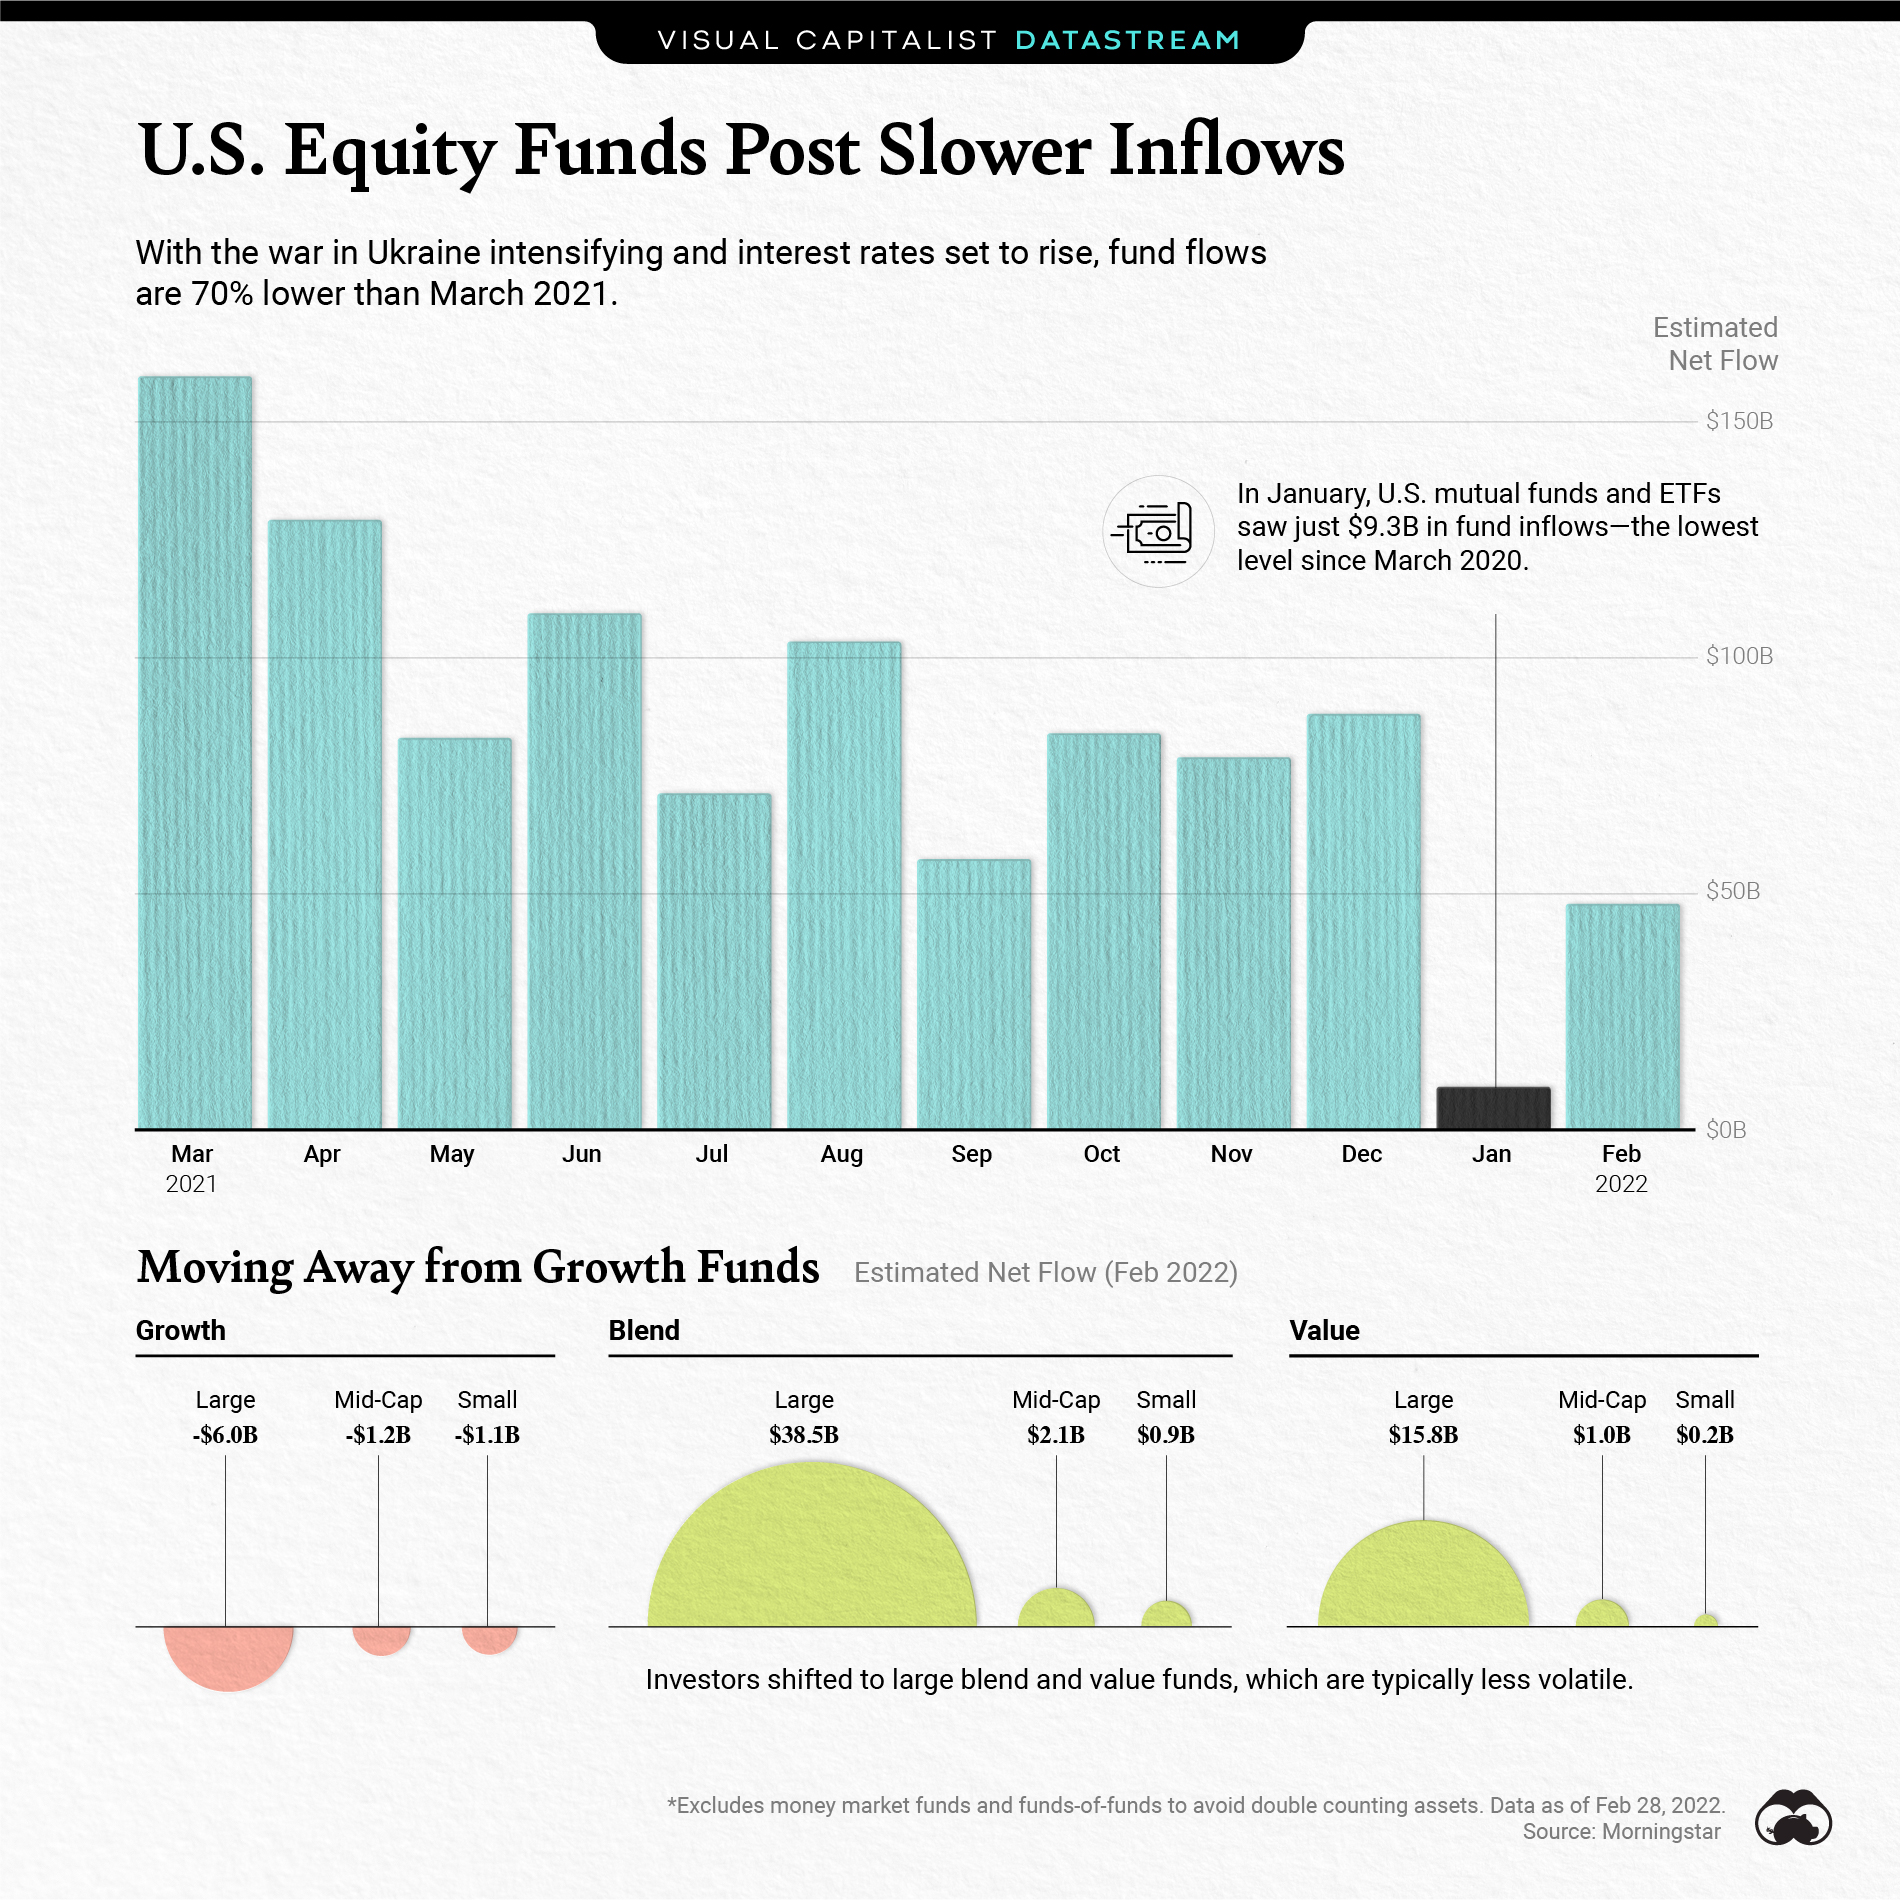 U.S. Equity Funds Post Slower Inflows - Visual Capital